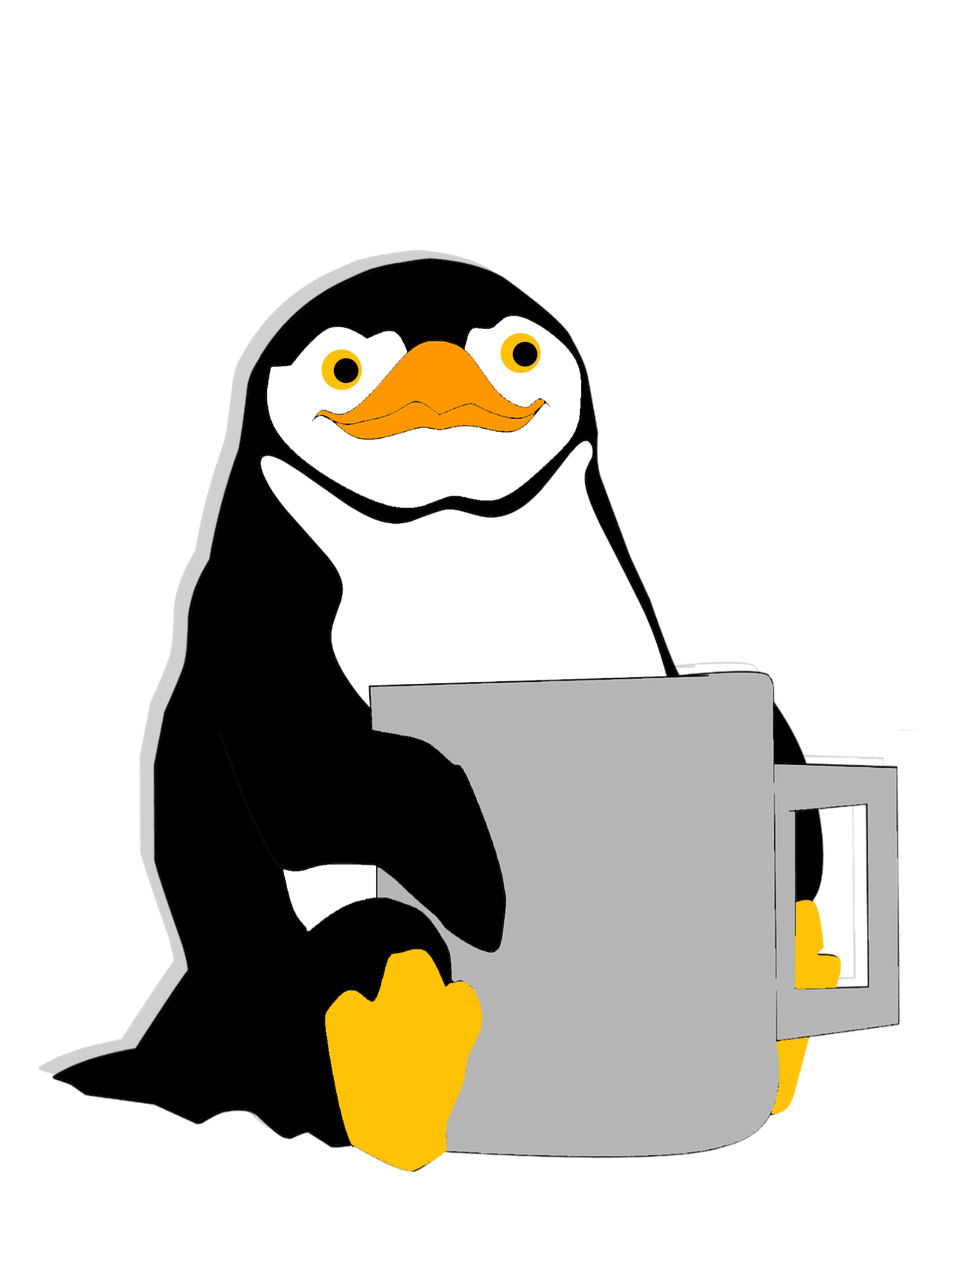 a penguin that is sitting in a cup, an illustration of, inspired by Muggur, reddit, poser, flash photo, drinking beer and laughing, full body close-up shot